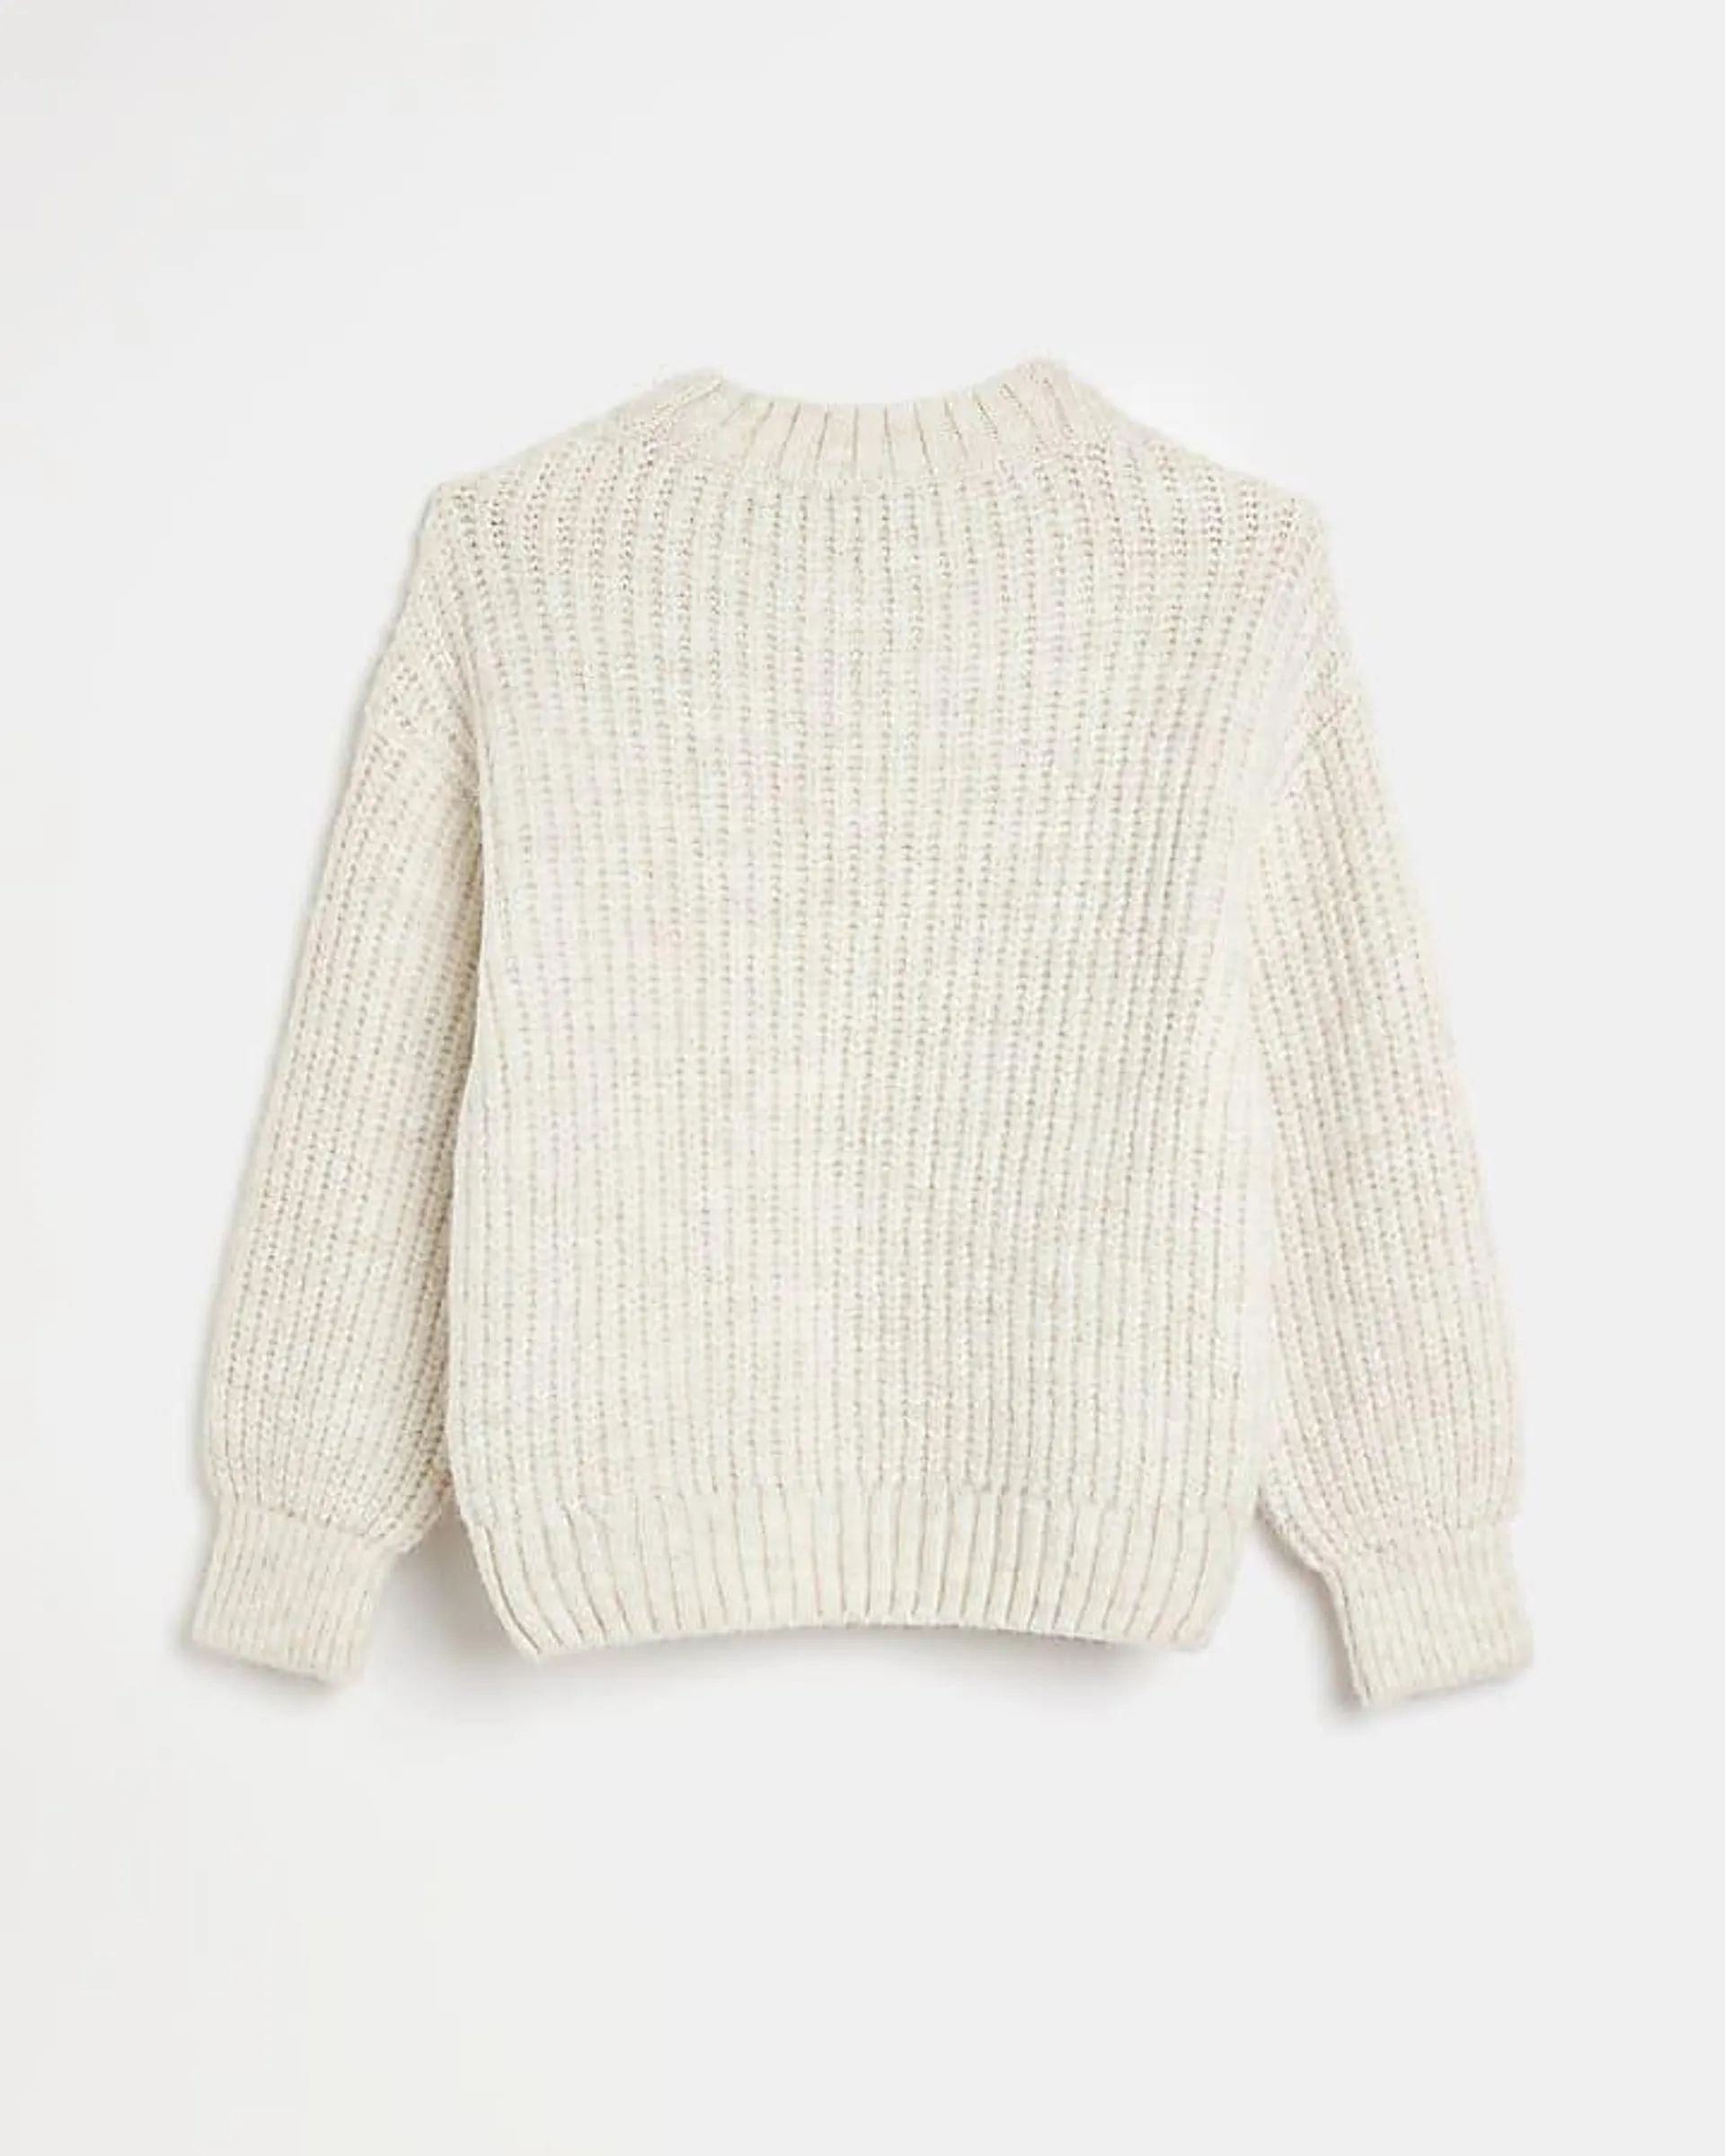 Girls beige chunky cable knit jumper